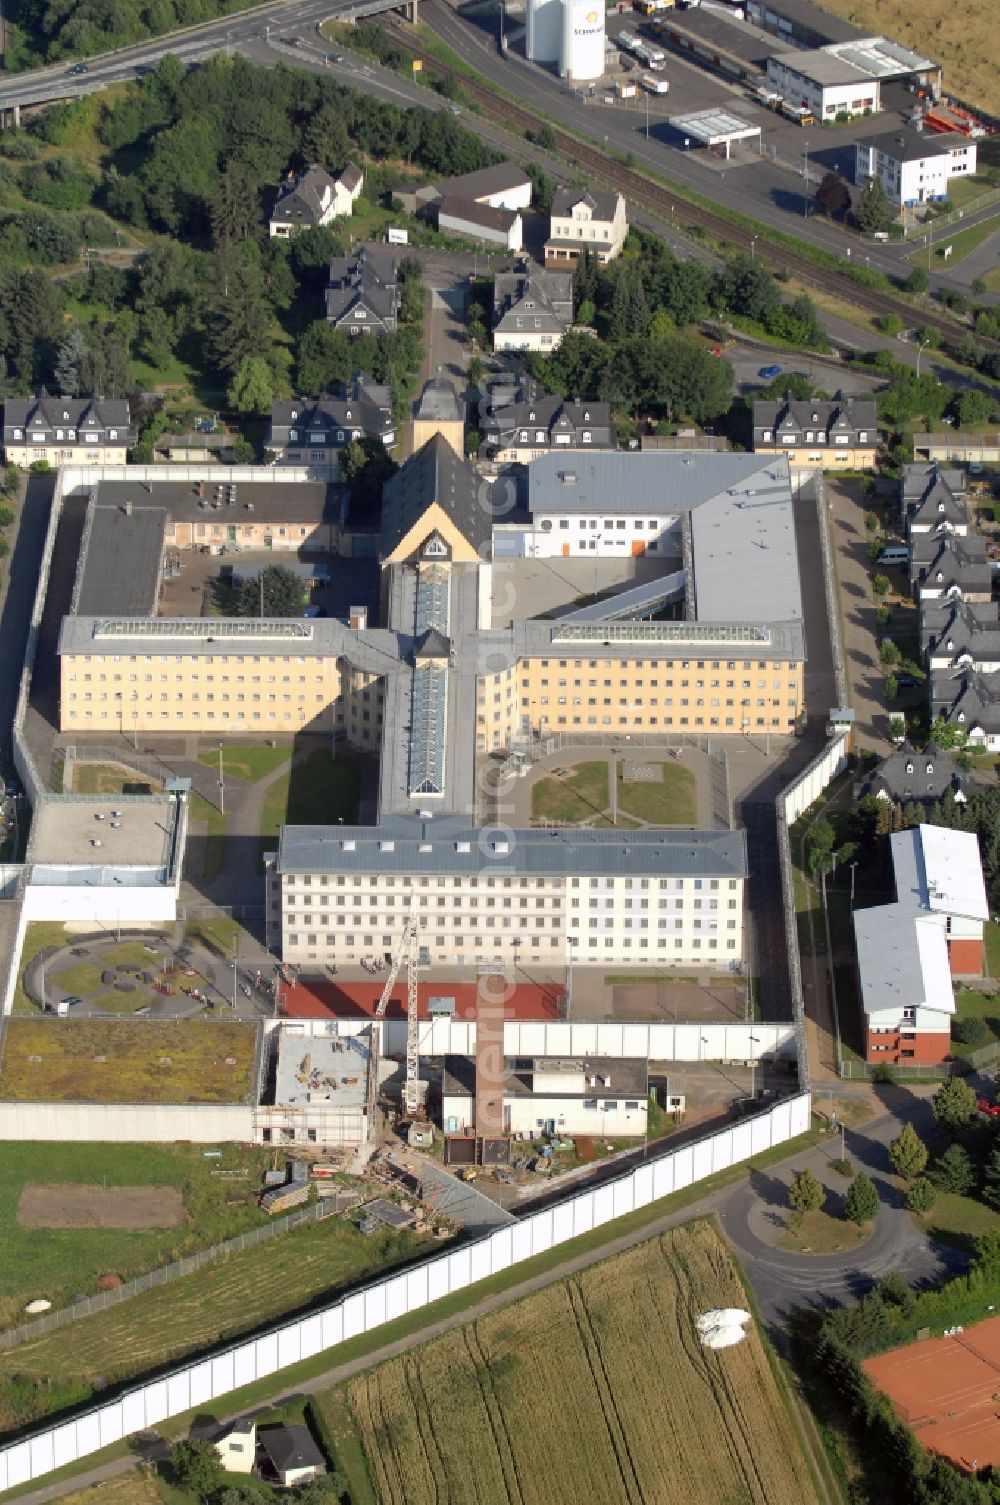 Aerial image Diez - Prison grounds and high security fence Prison Dietz in Diez in the state Rhineland-Palatinate, Germany